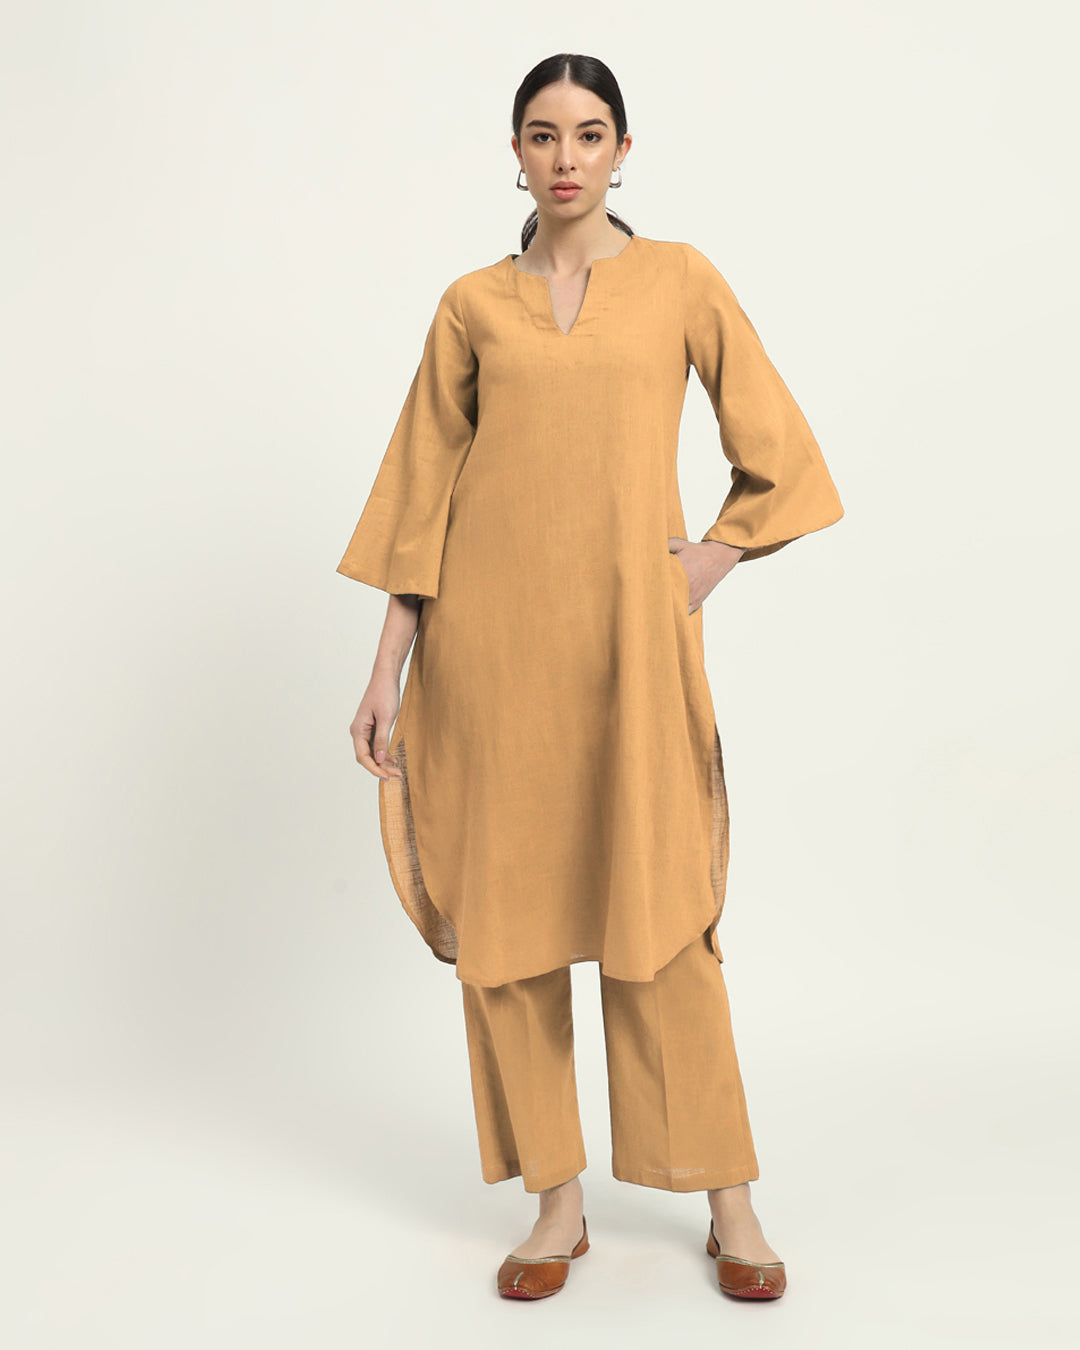 Combo: Beige & Iris Pink Rounded Reverie Solid Kurta